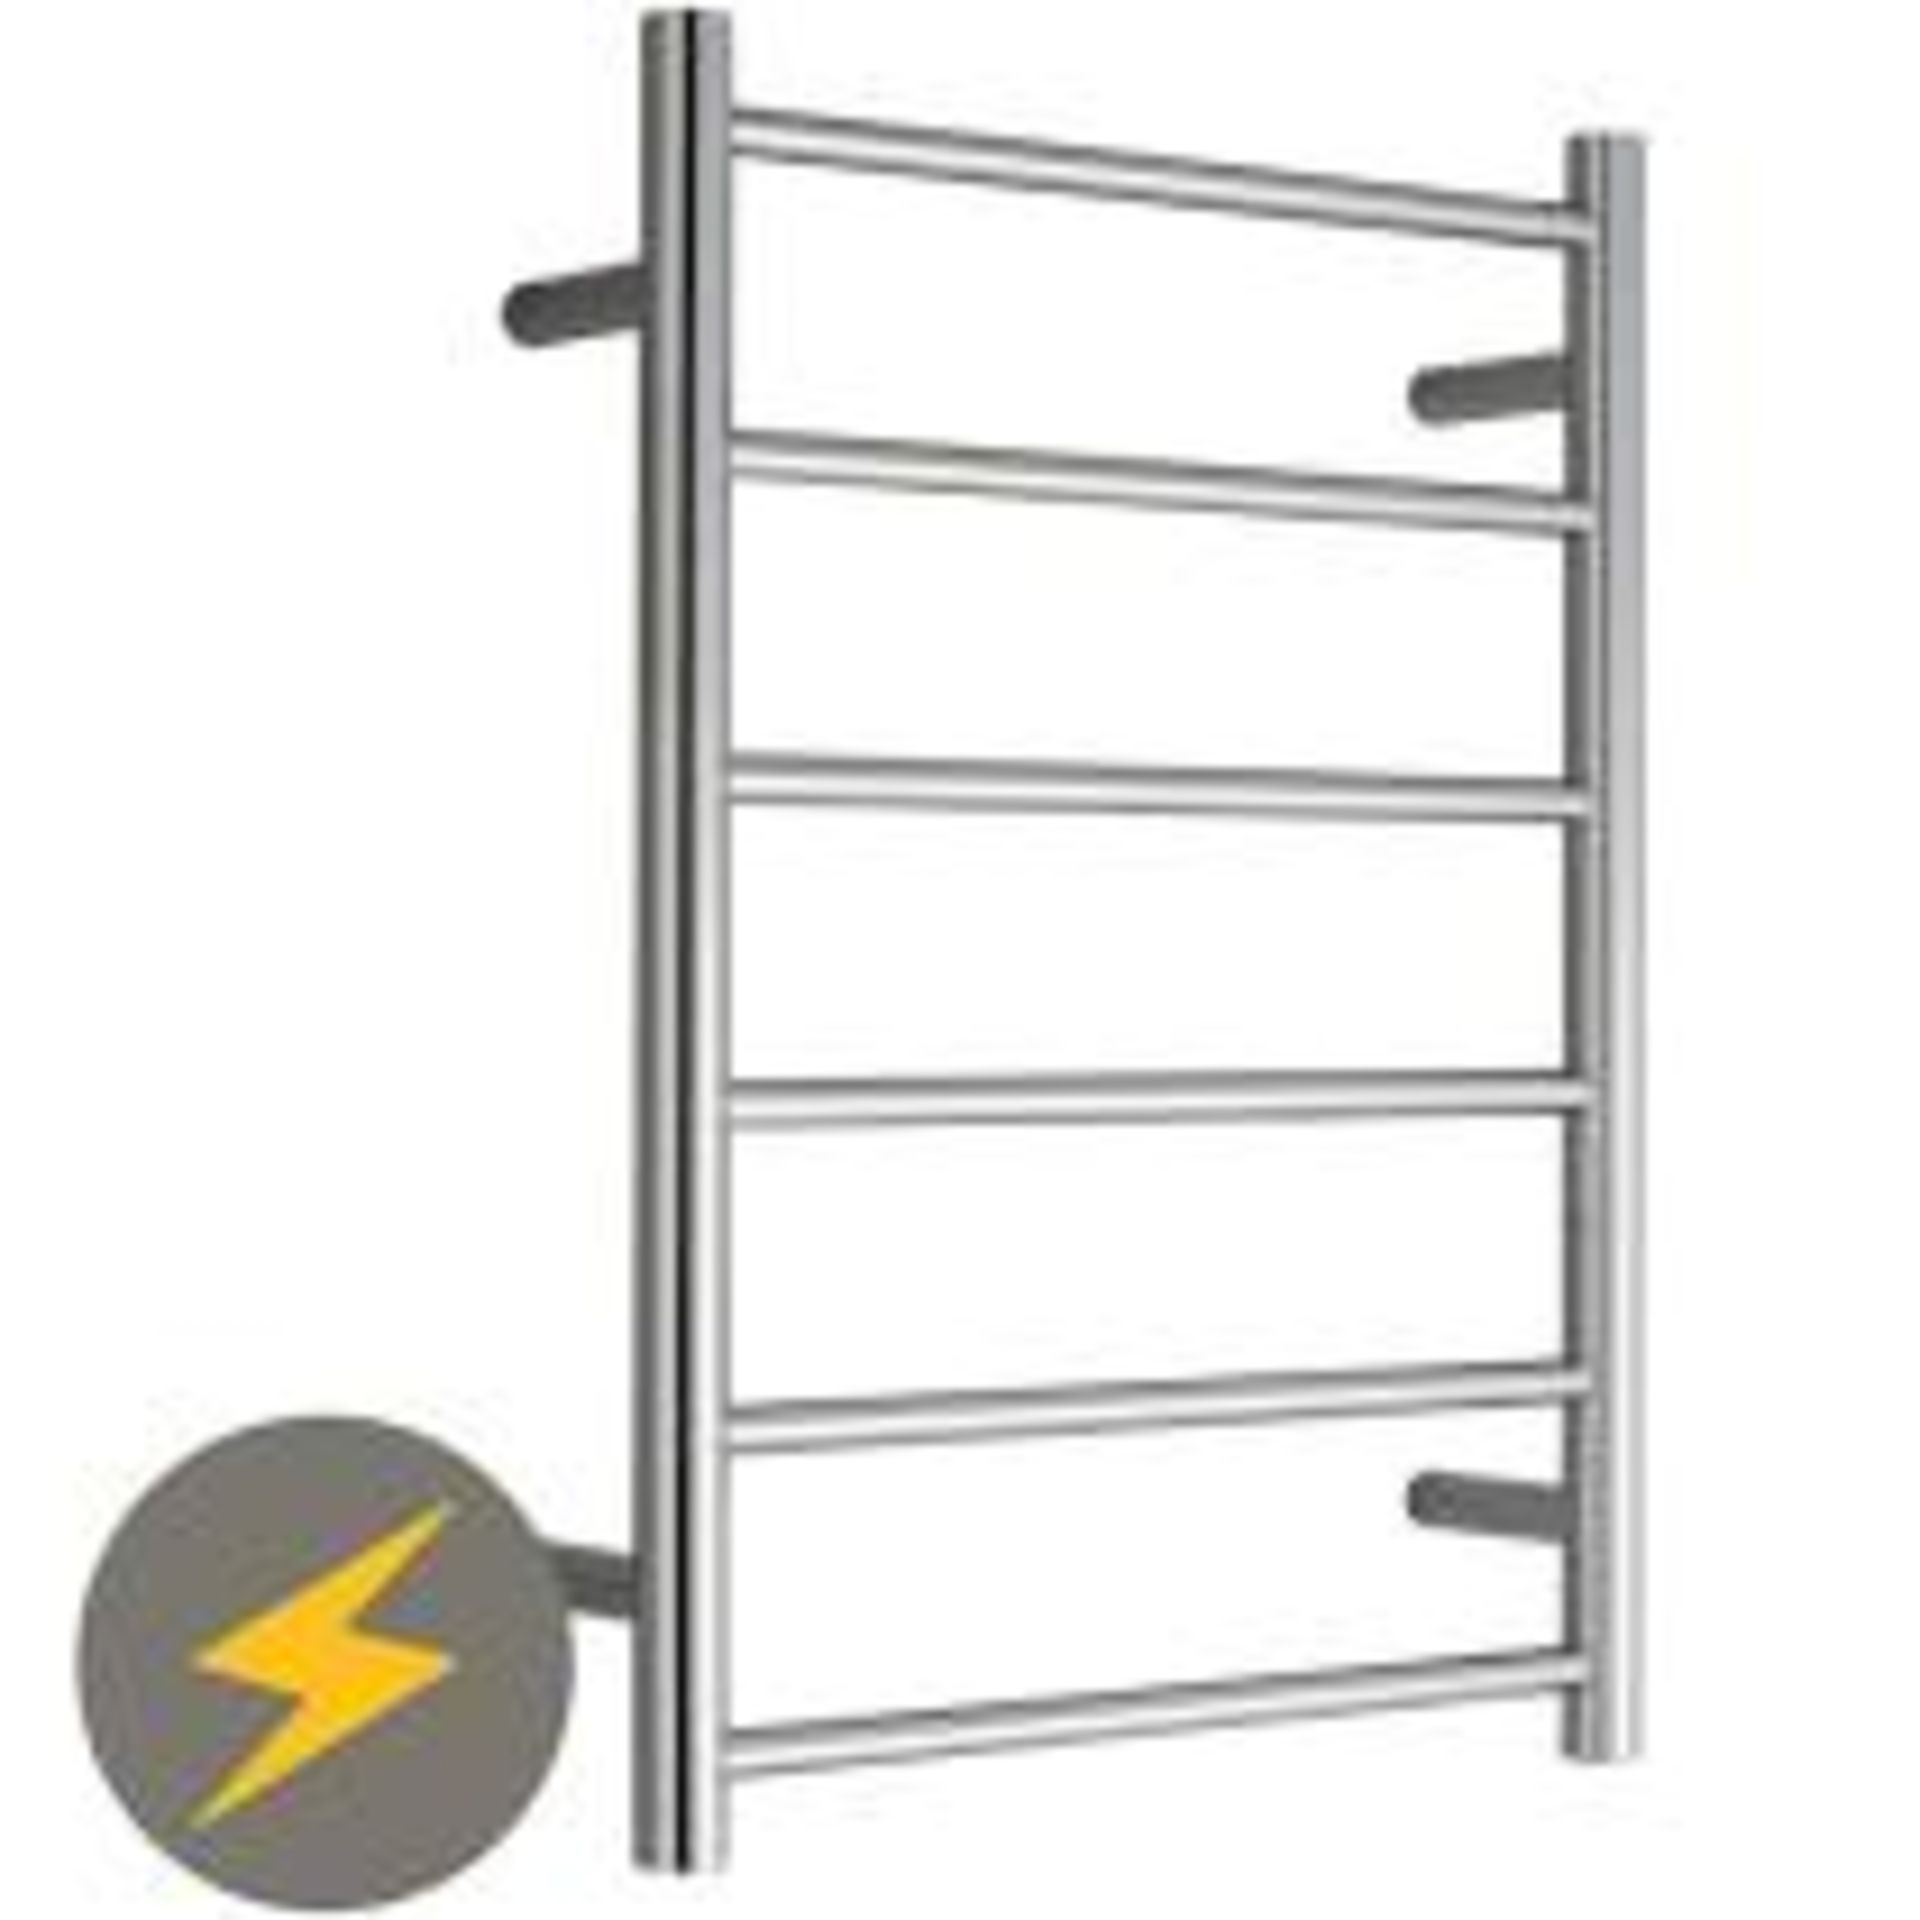 Boxed Manissa Chester Electric Towel Warmer RRP £60 (18104) (Appraisals Available)